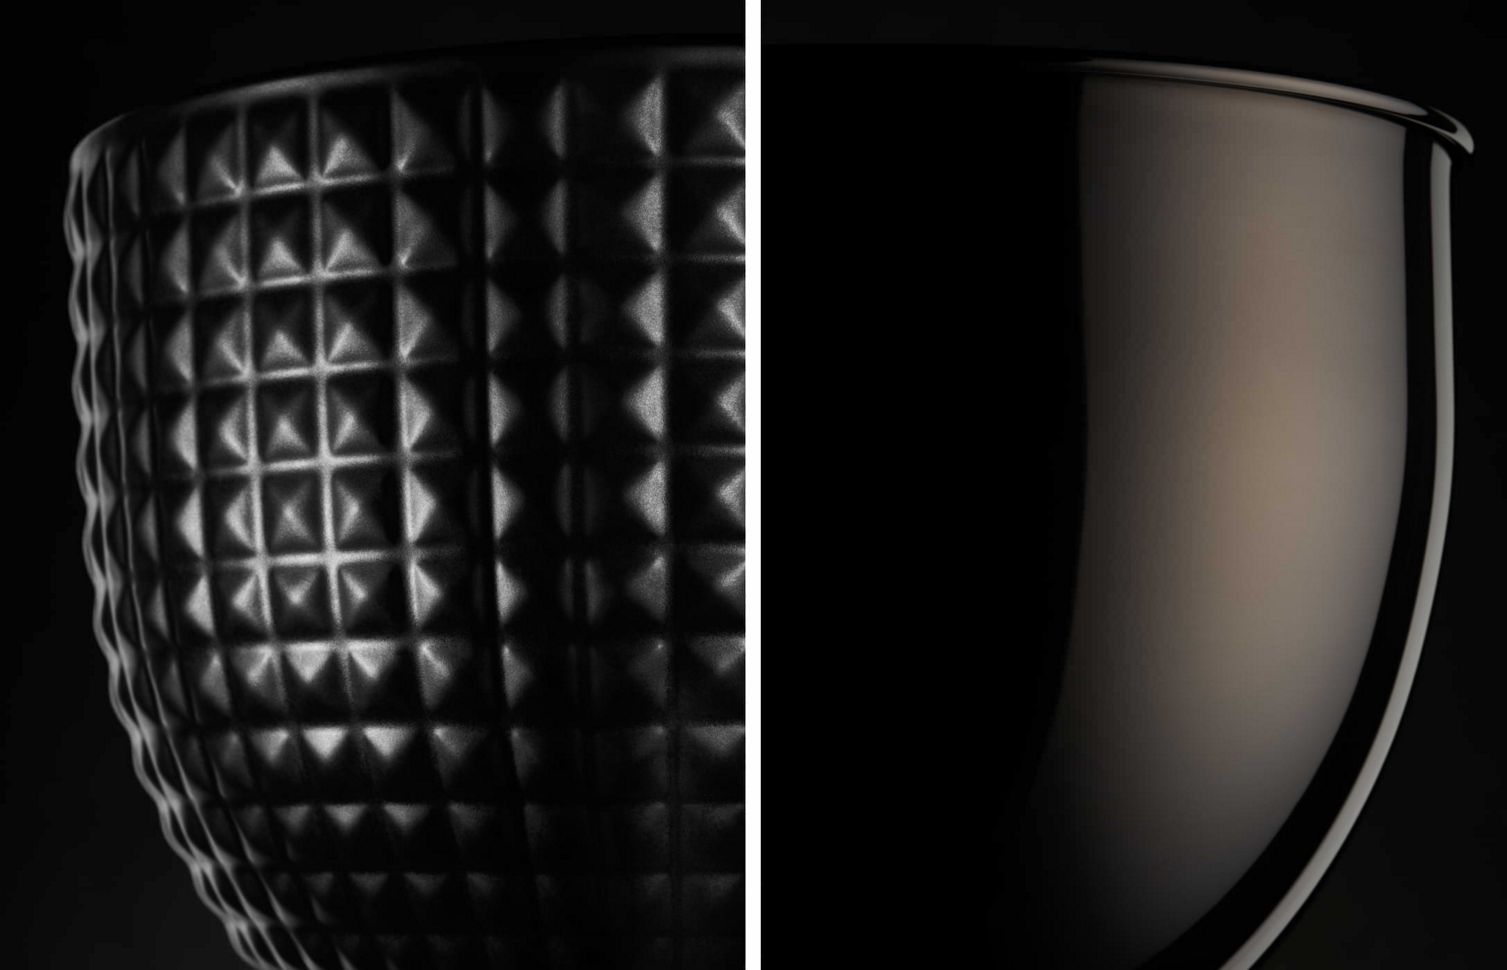 A closeup of both the black ceramic studded bowl and the black stainless steel bowl.